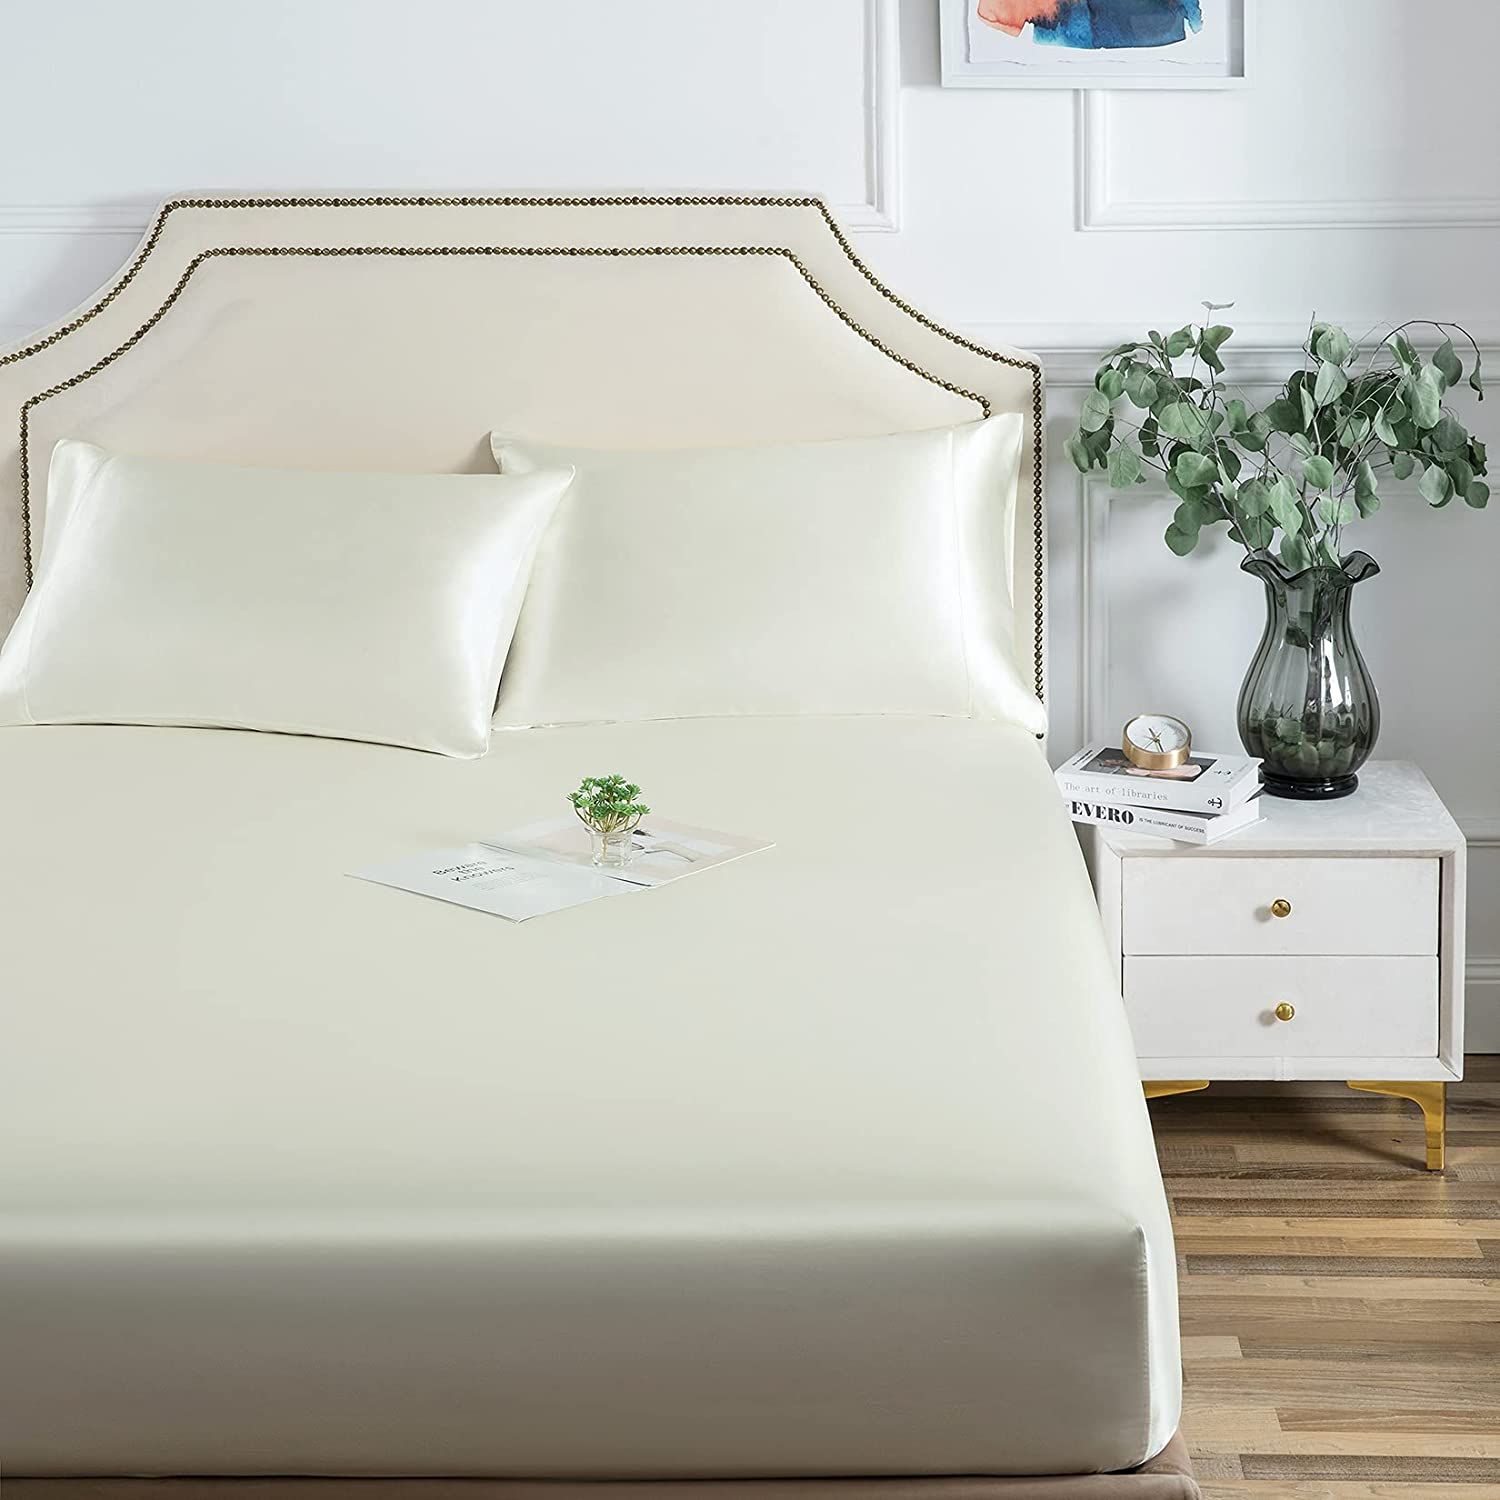 Satin Mattress Protector Non-slip Artificial Satin Silk Mattress Pad Cover Soft Wrinkle Free Fitted Bed Sheet